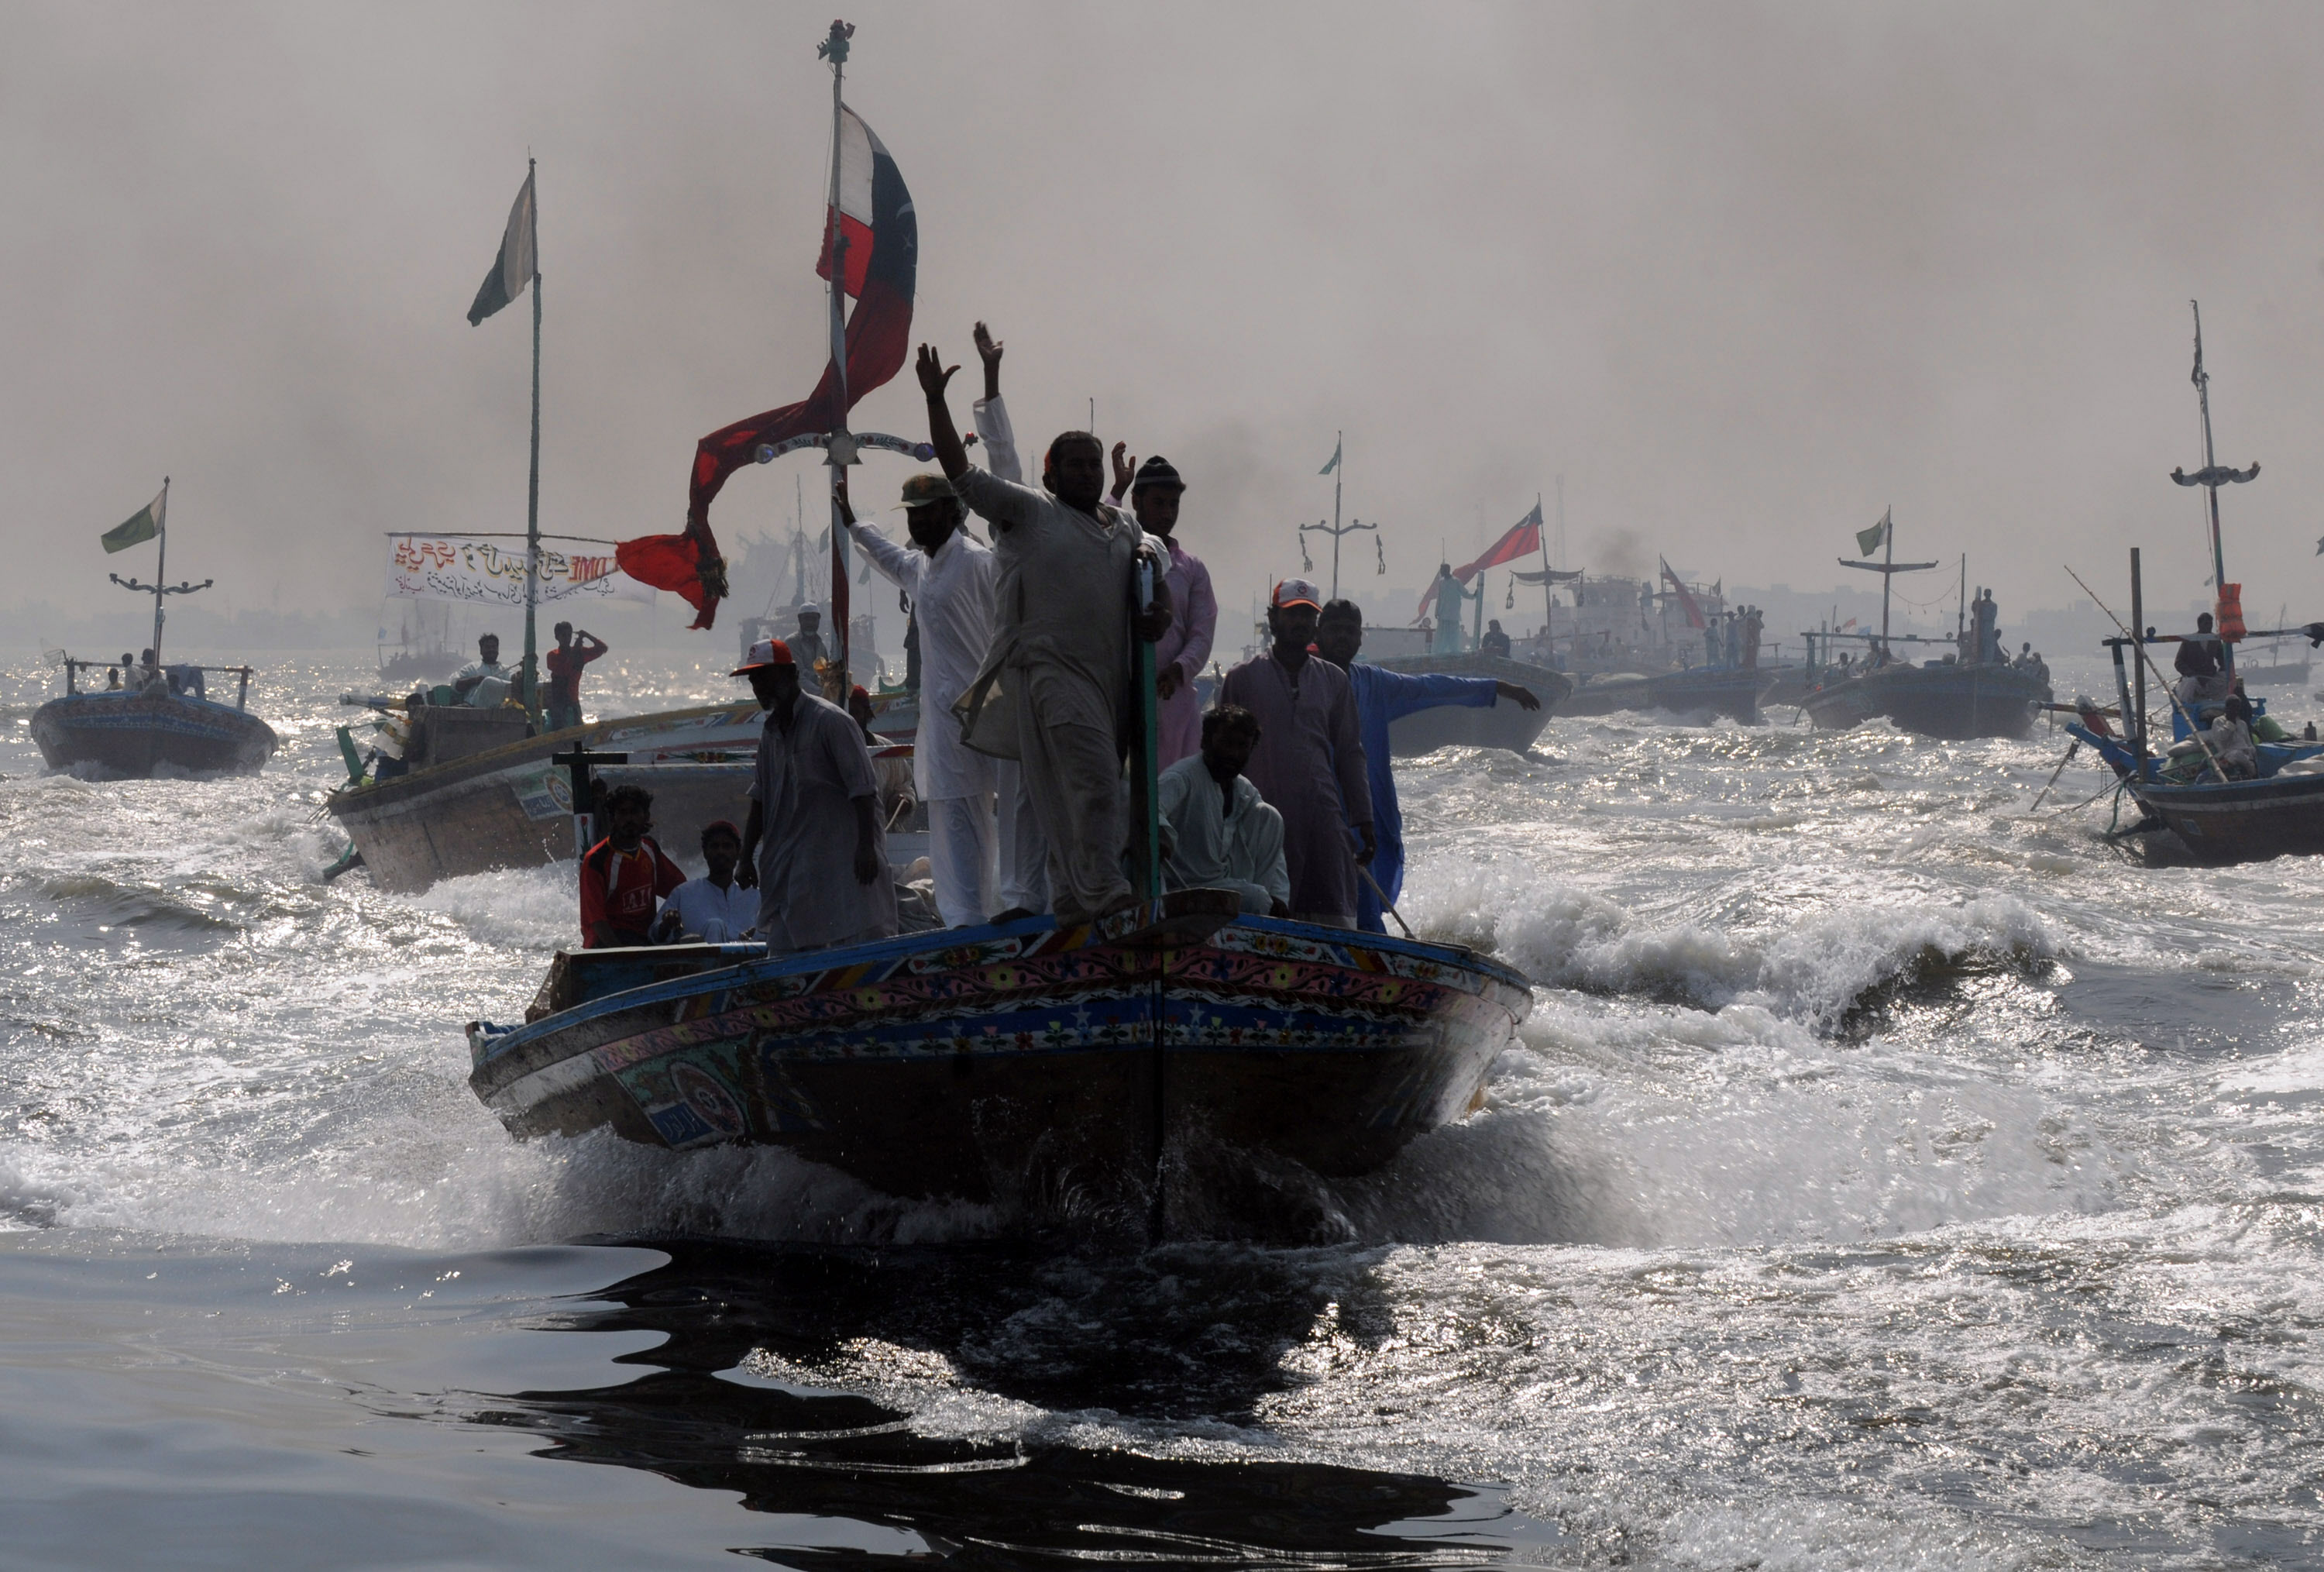 Pakistani fishing boats rally in the Arabian Sea ahead of the World Fisheries Day in Karachi on November 20, 2009. Fishing communities worldwide celebrate on November 21 withrallies, workshops, public meetings, cultural programs, dramas, exhibition, music show, and demonstrations to highlight the importance of maintaining the world's fisheries. A recent United Nations study reported that more than two-thirds of the world's fisheries have been overfished or are fully harvested and more than one third are in a state of decline because of factors such as the loss of essential fish habitats, pollution, and global warming. AFP PHOTO/ RIZWAN TABASSUM / AFP PHOTO / RIZWAN TABASSUM